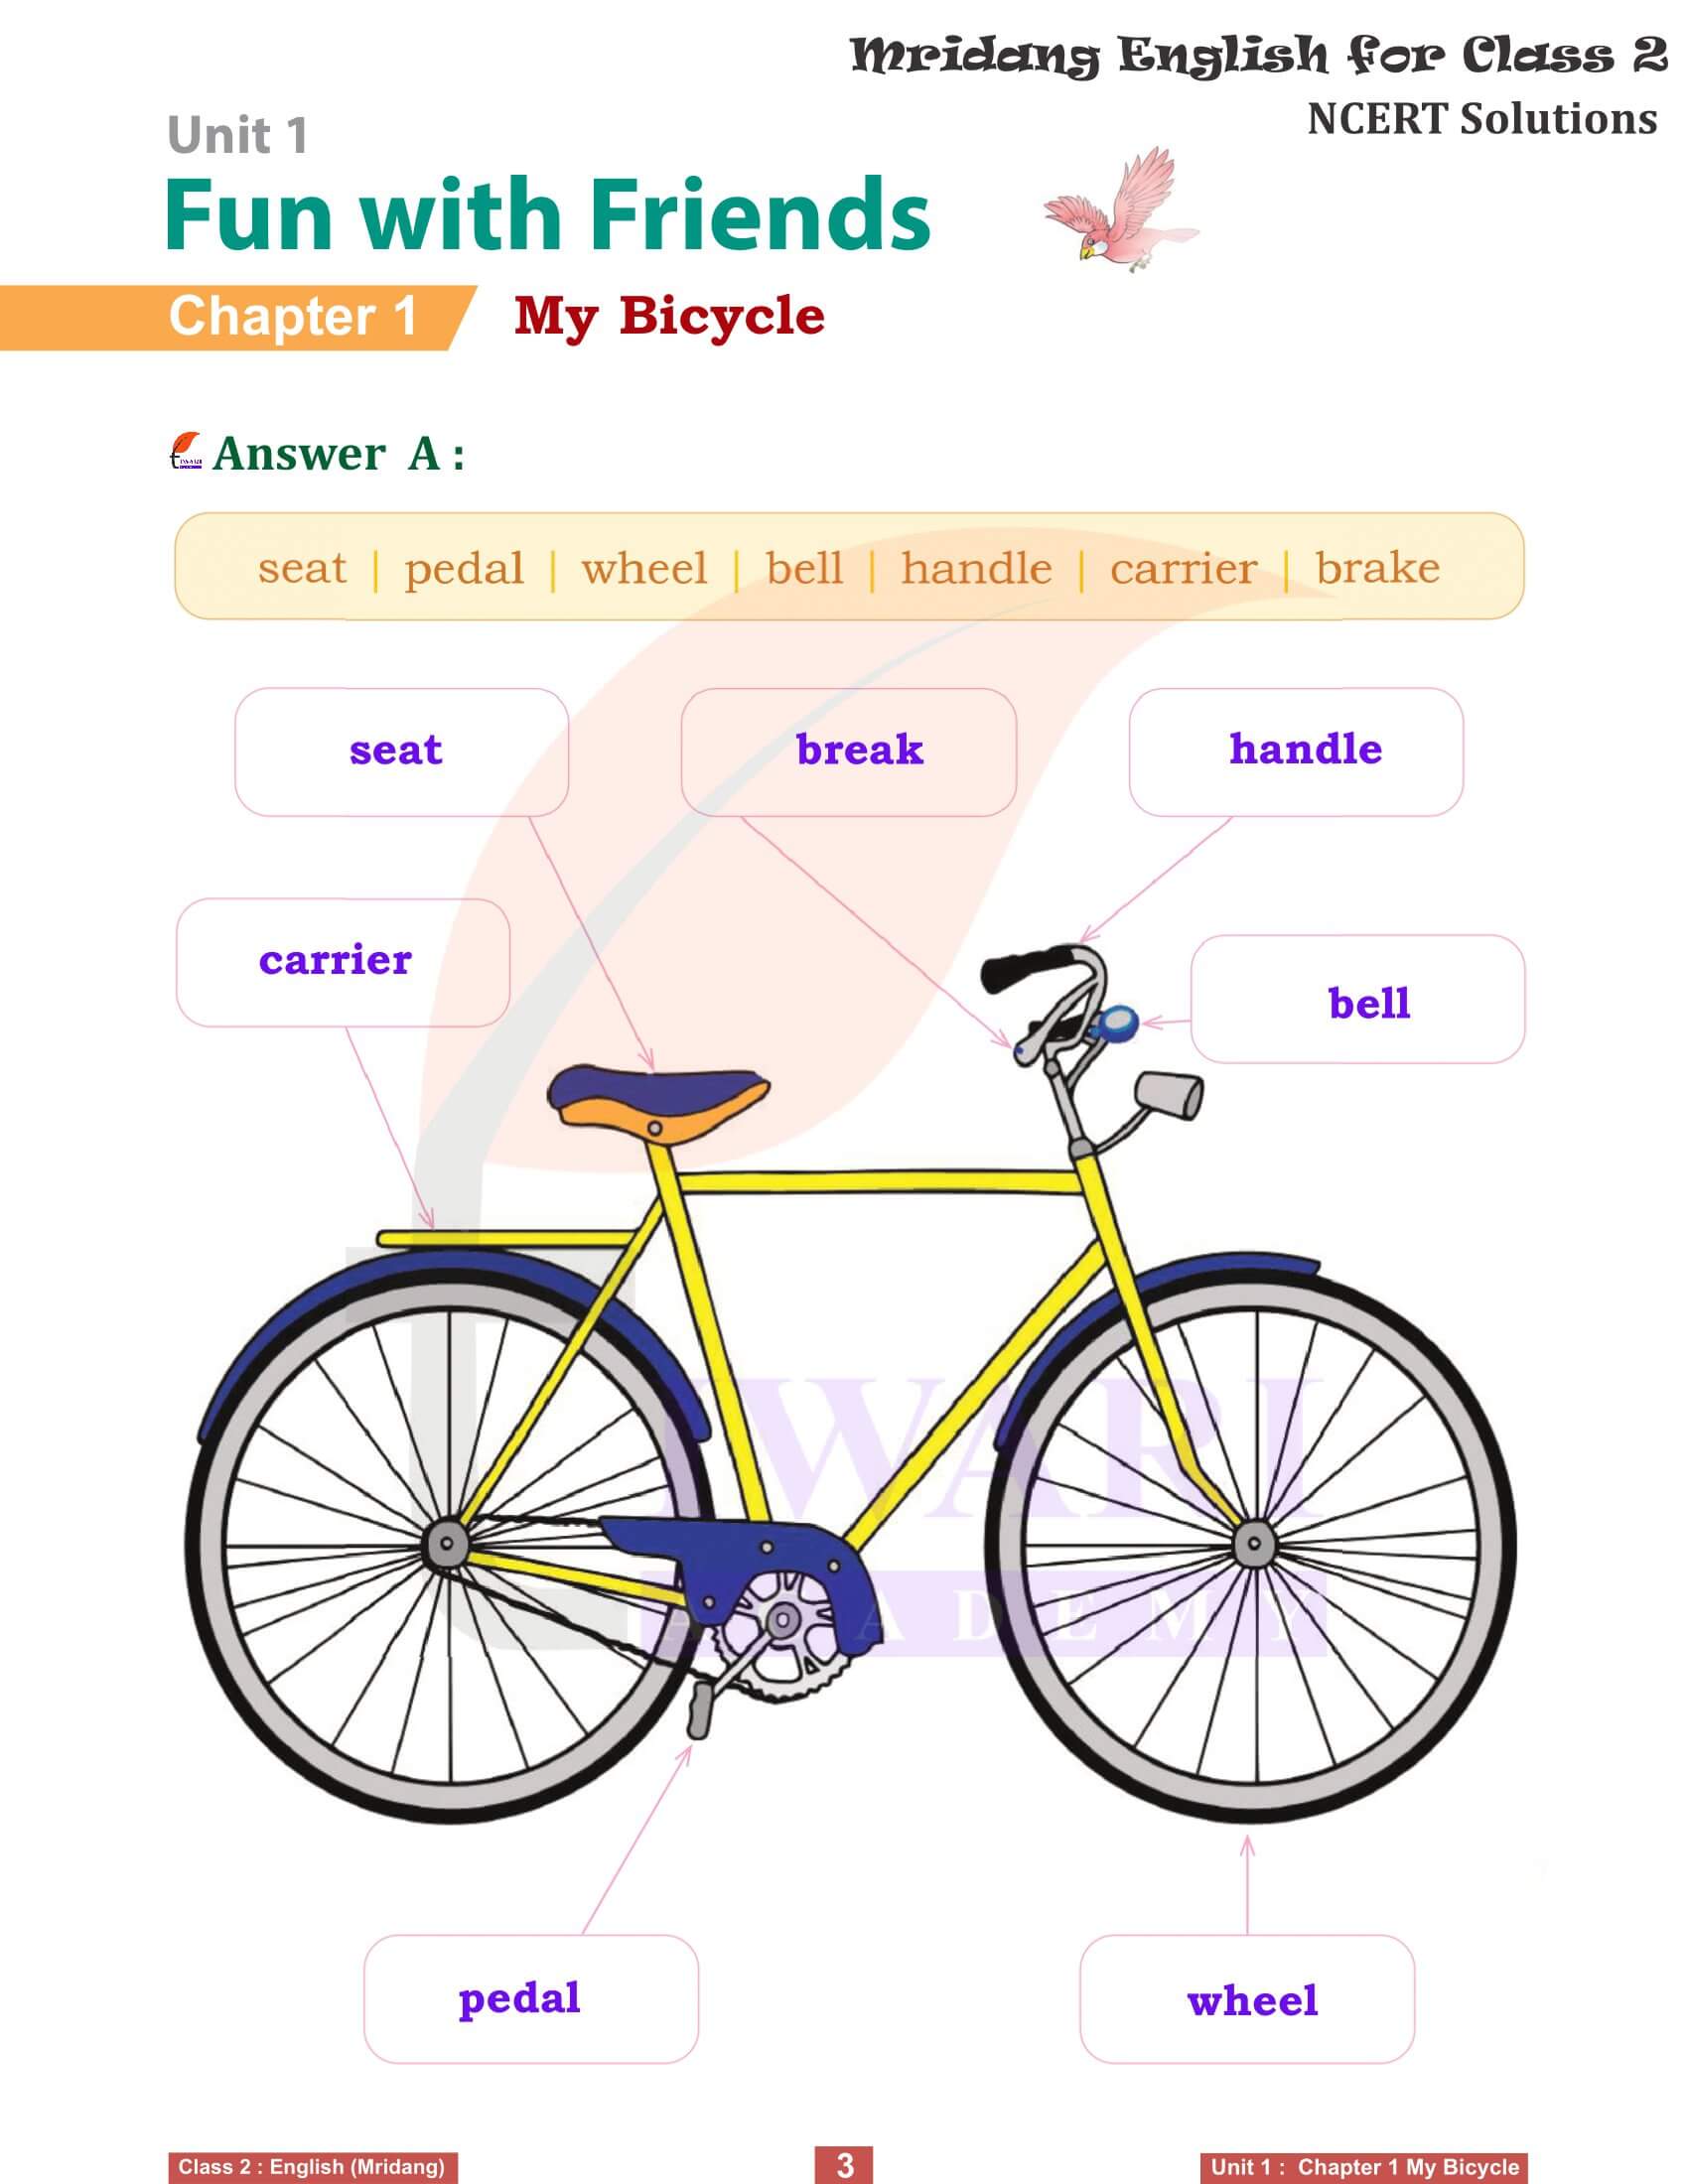 NCERT Solutions for class 2 English Mridang unit 1 Fun with Friends Chapter 1 My Bicycle Question Answers